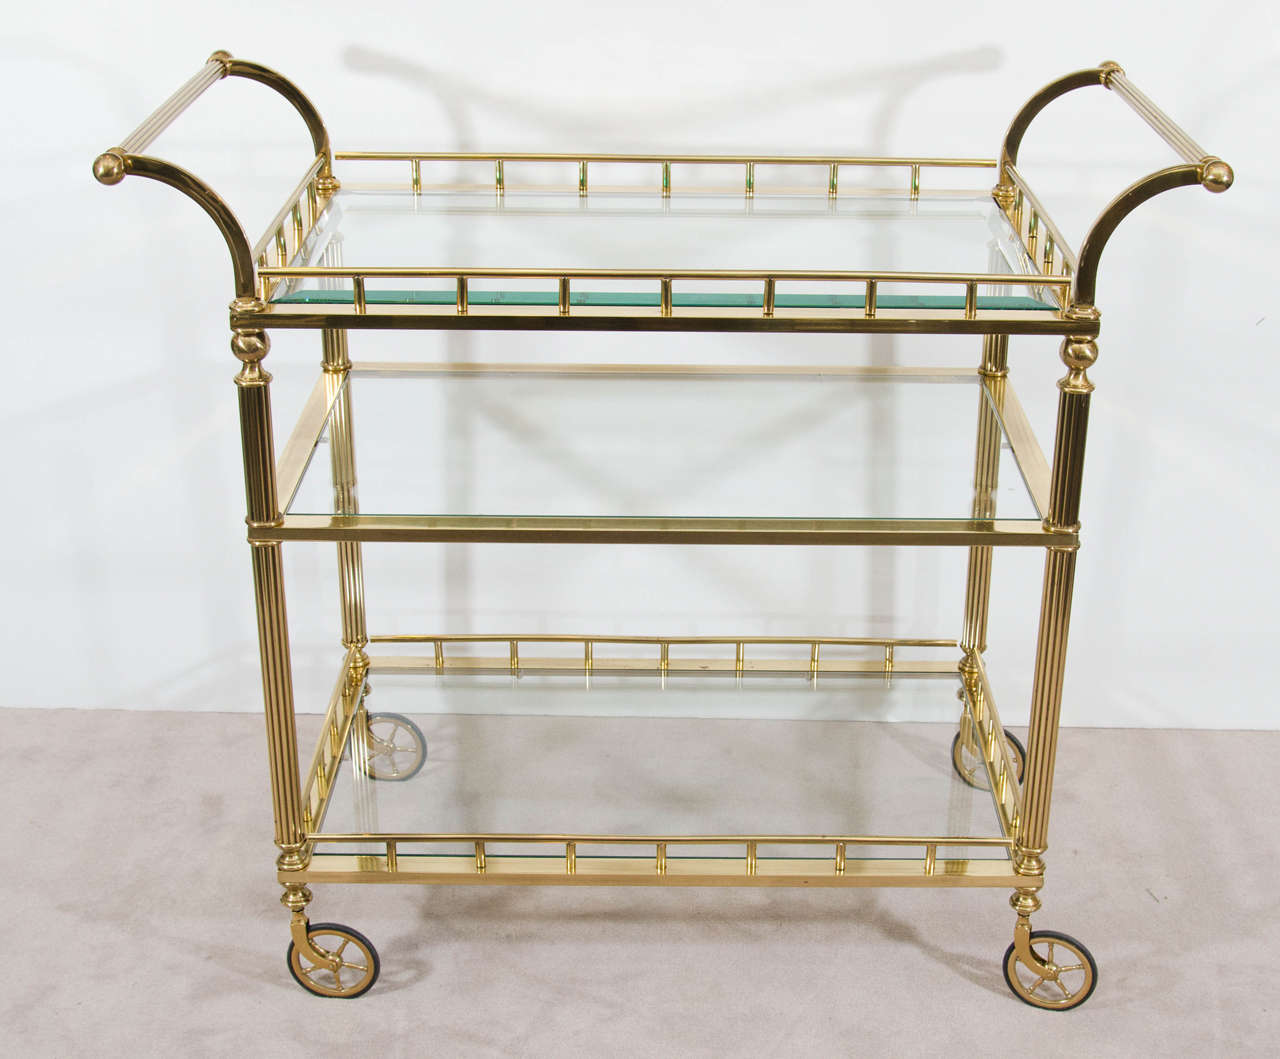 A vintage double handle brass bar cart with three tiers of glass shelves. The top shelf has beveled glass.